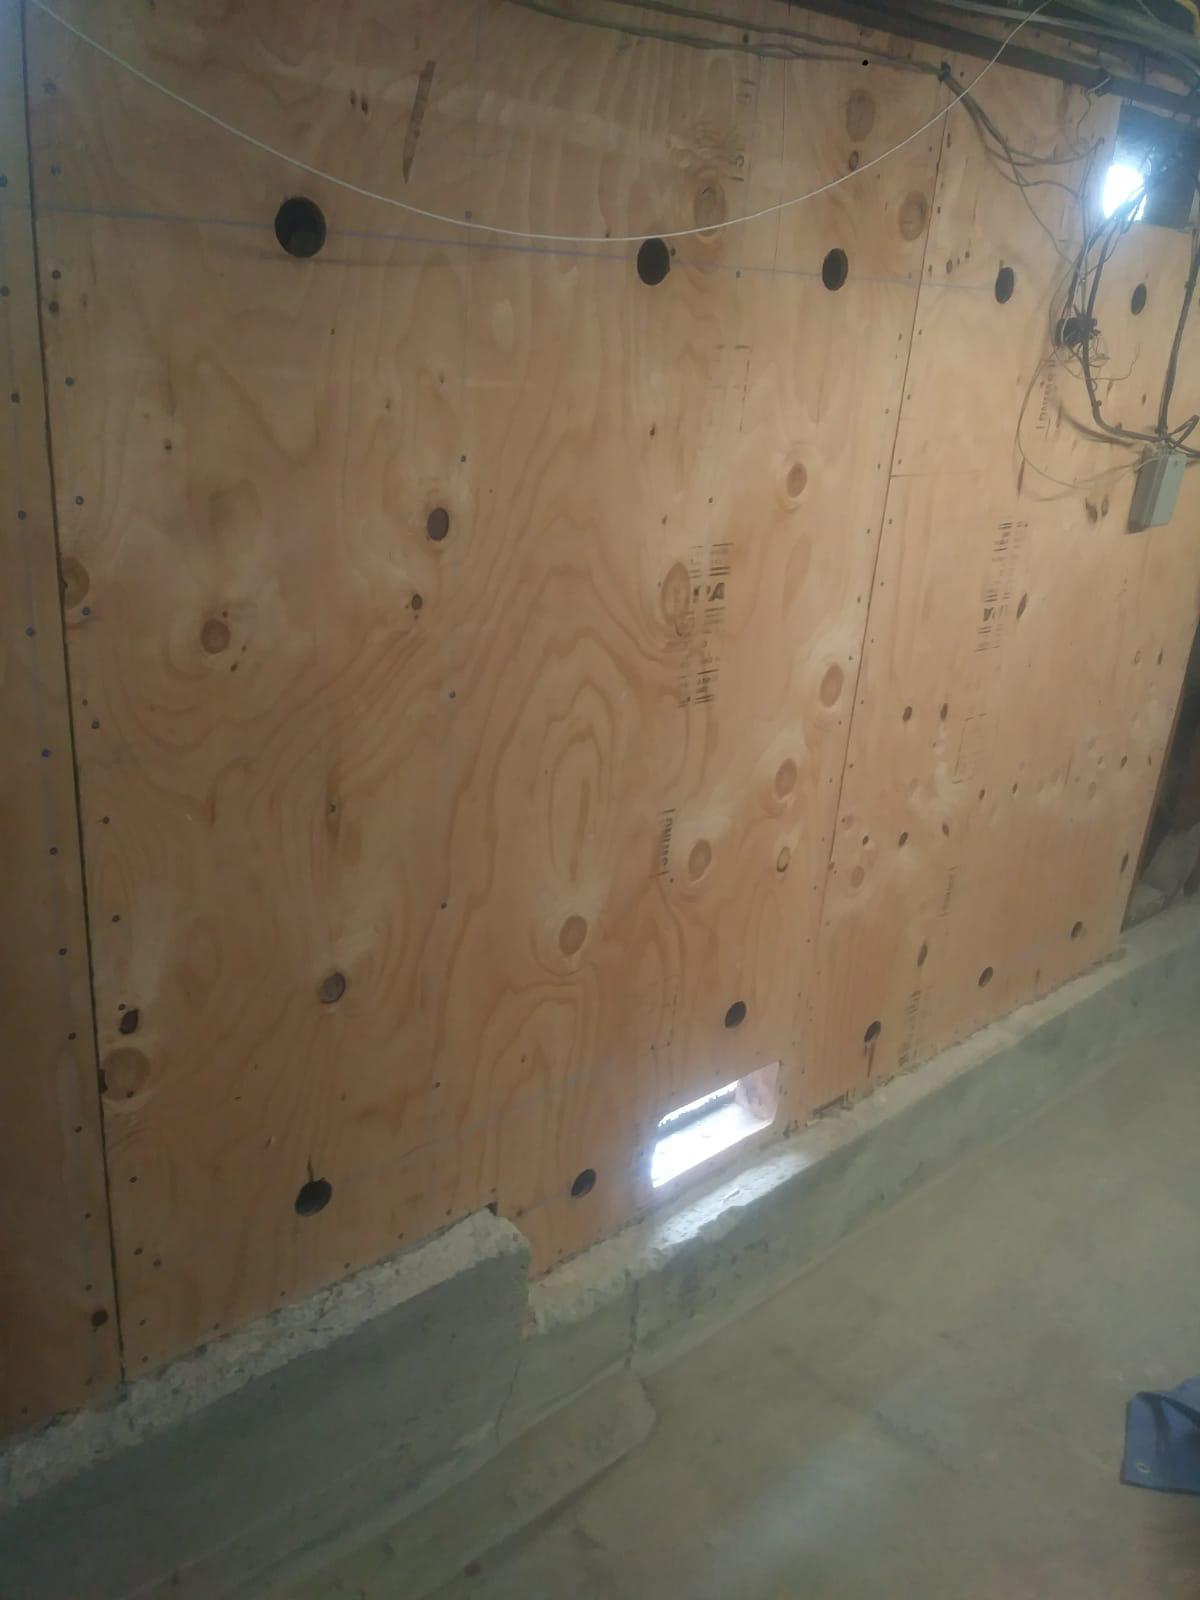  Structural grade plywood for cripple wall bracing. 